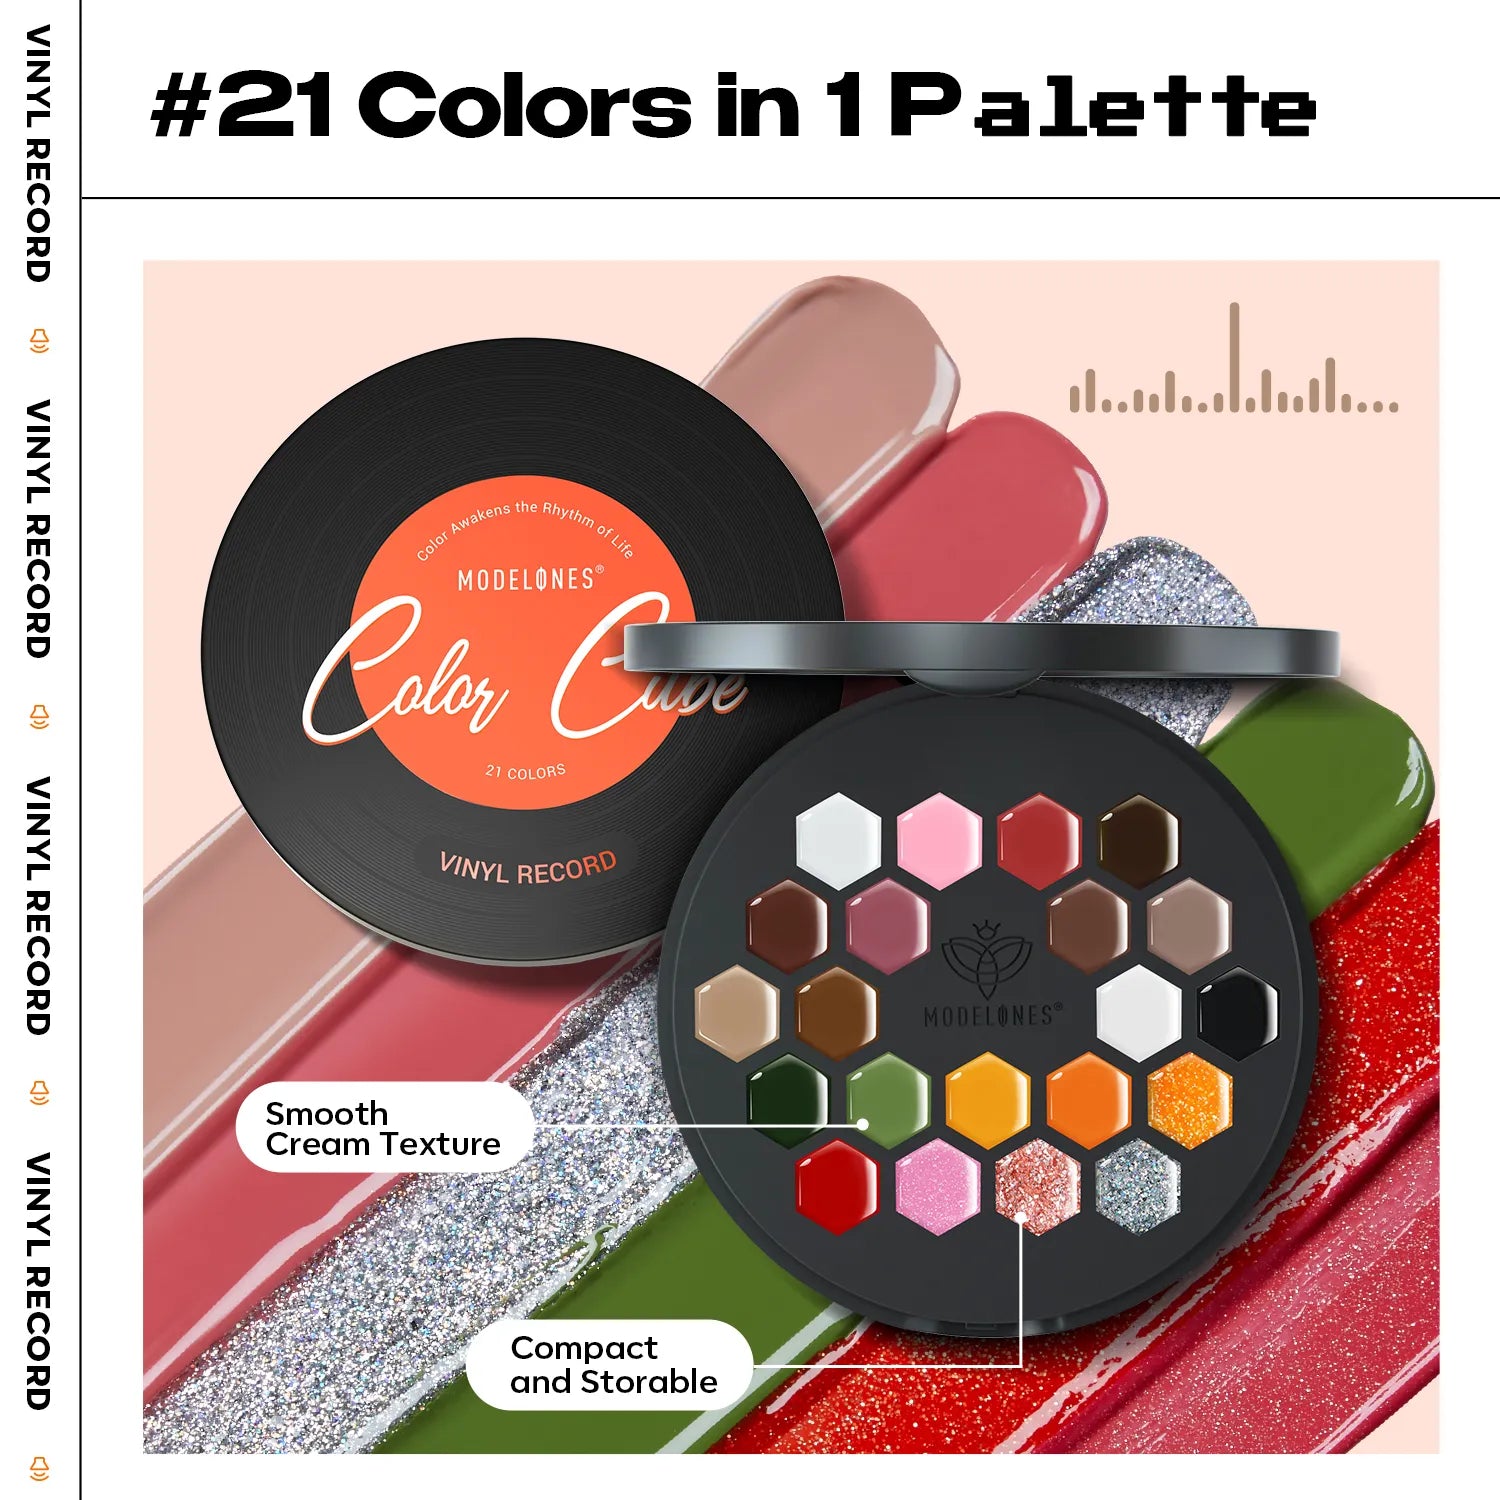 21 Colors Vinyl Record Solid Cream Gel Polish Color Cube Collection